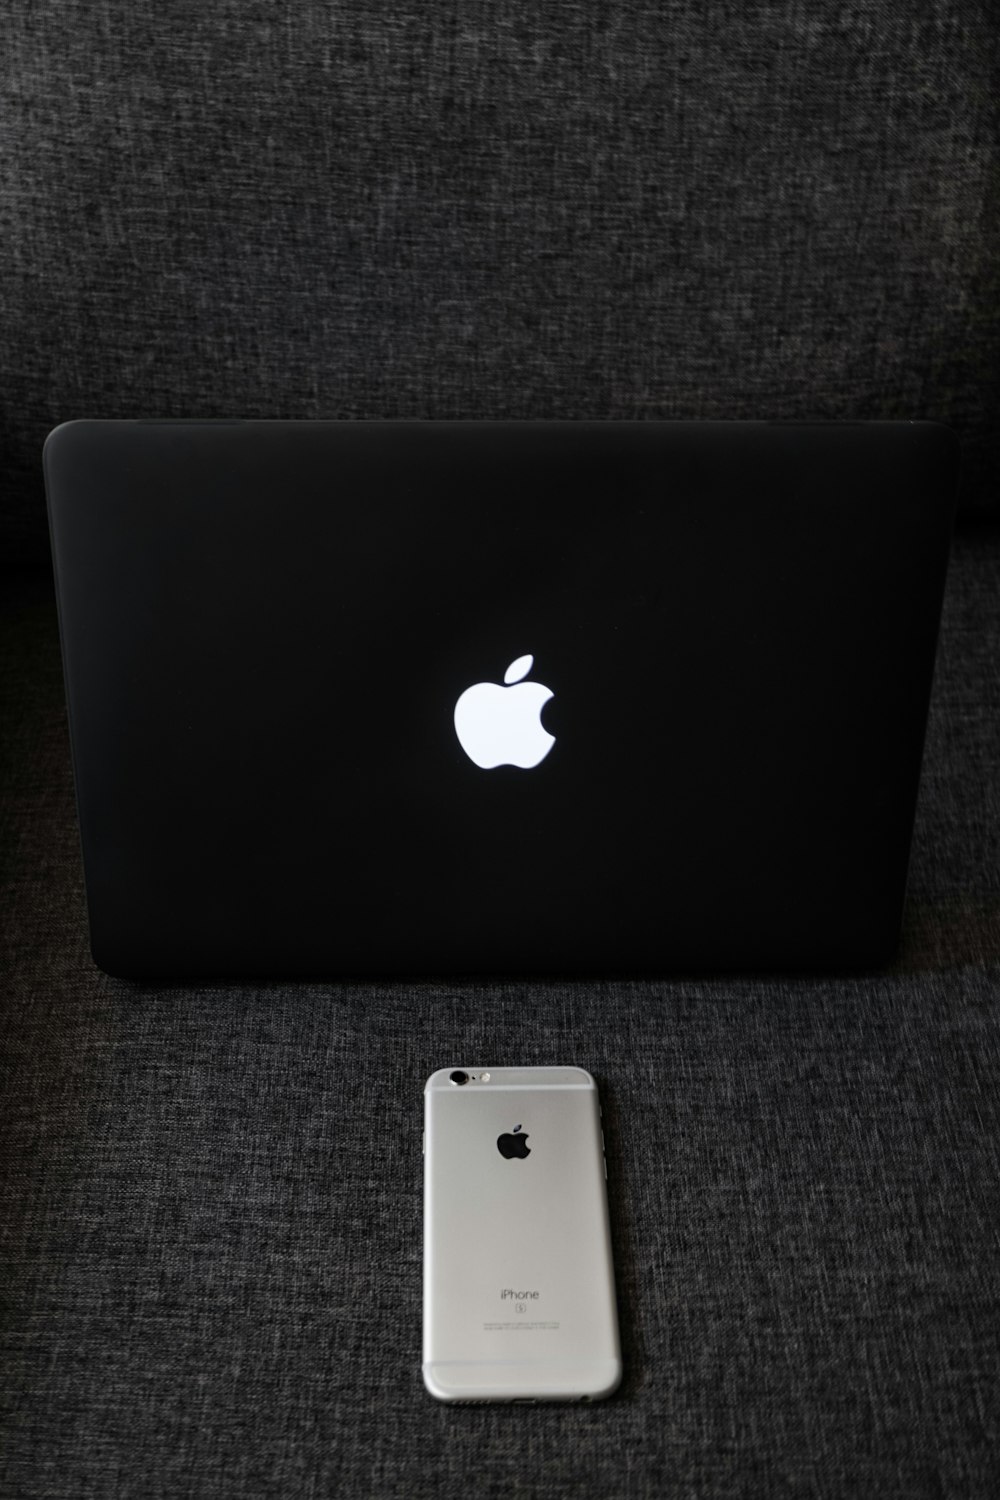 silver macbook on gray textile